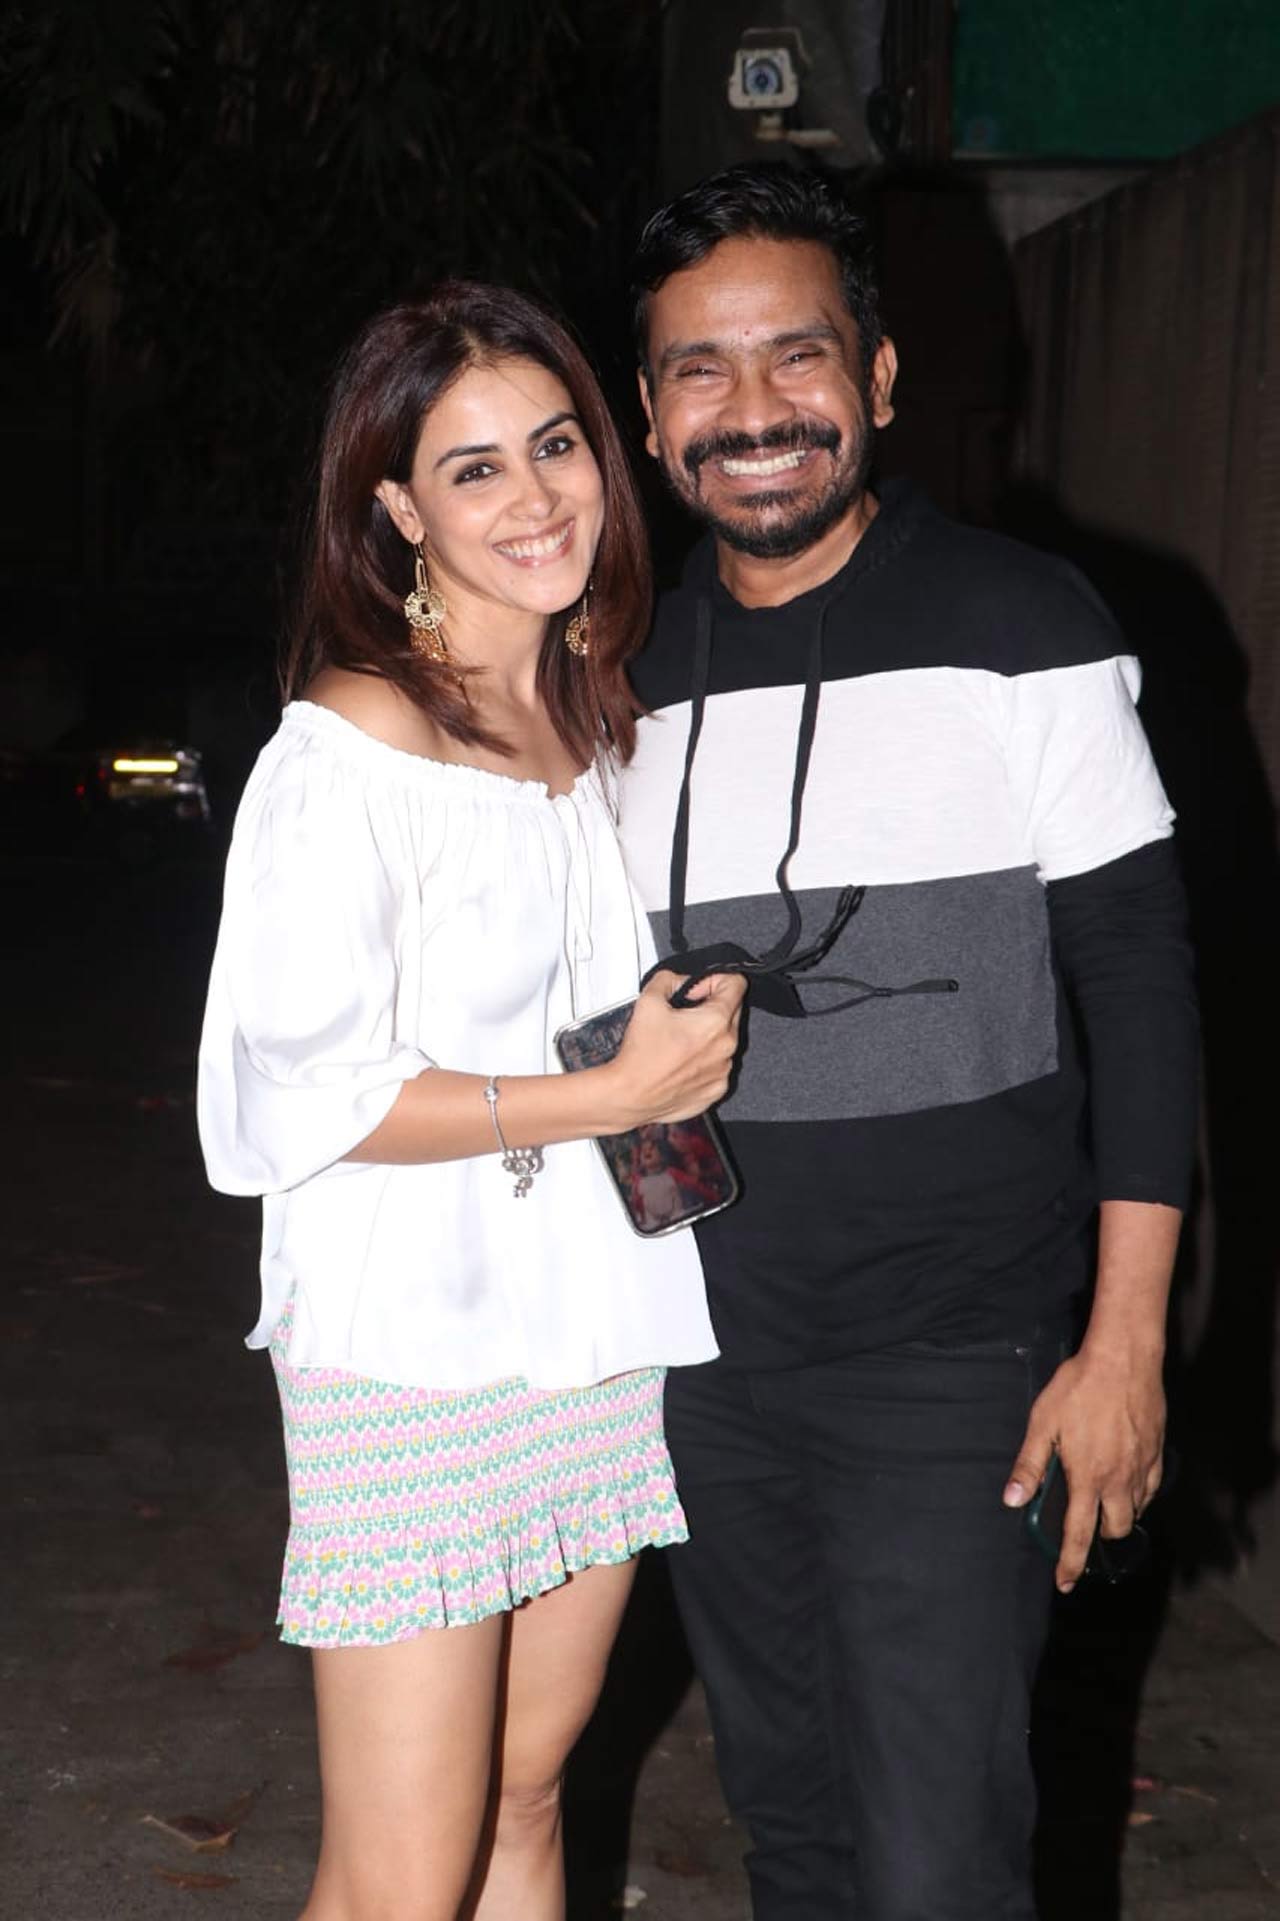 Genelia Deshmukh and Mushtaq Sheikh were all smiles as they attended the special screening of Satyameva Jayate hosted a popular studio in Juhu, Mumbai.